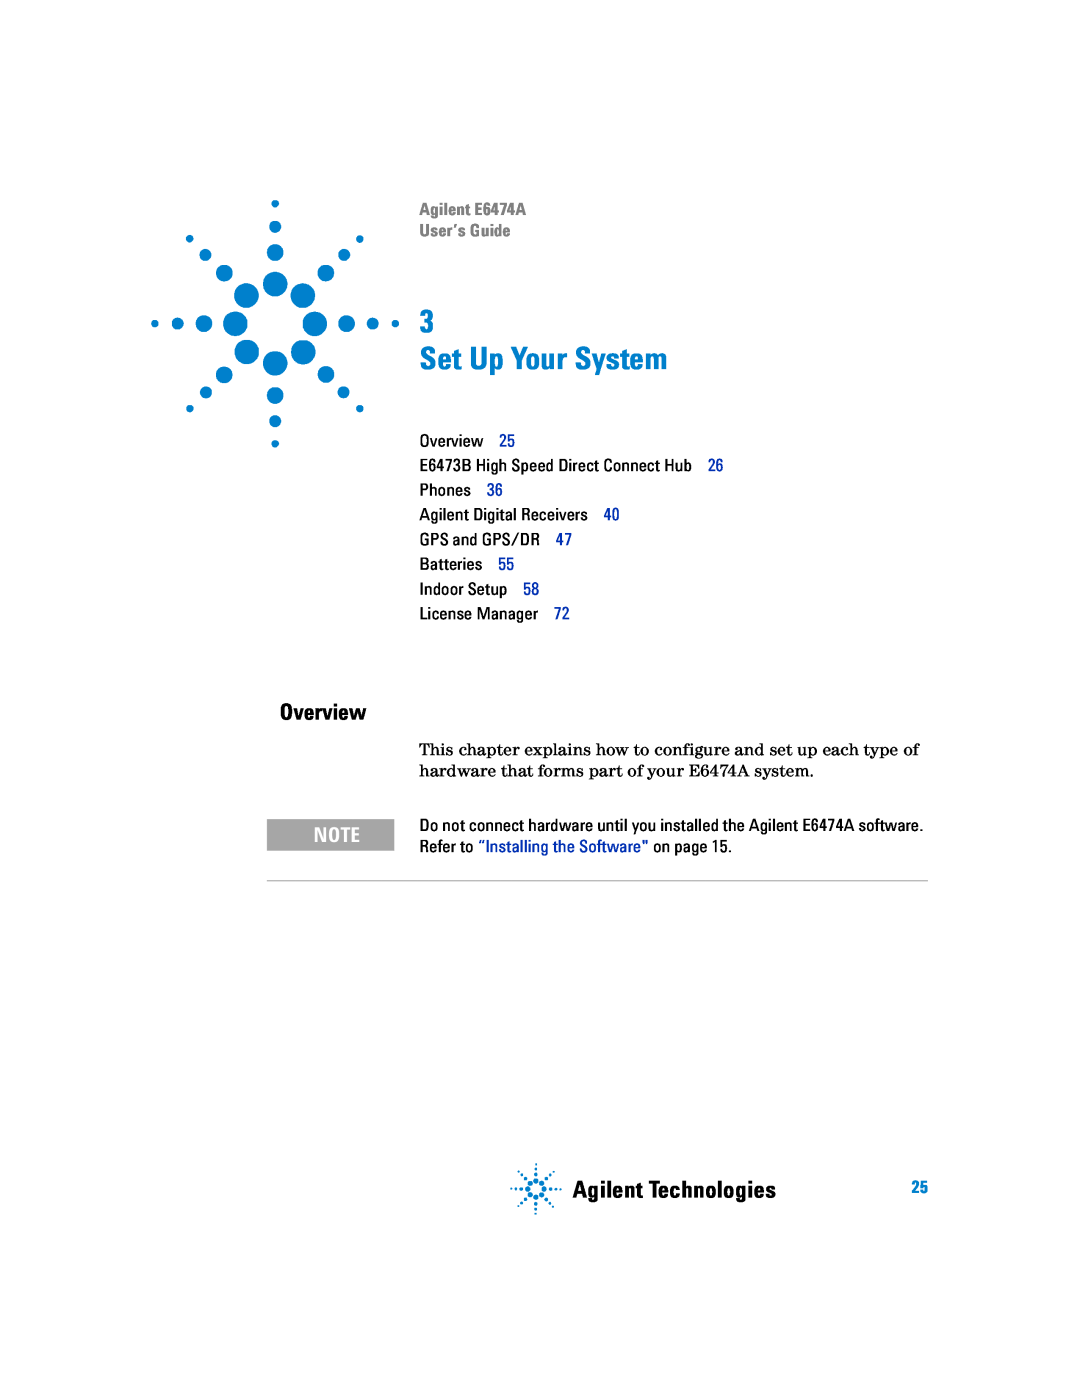 Agilent Technologies manual Set Up Your System, Overview, Agilent Technologies, Agilent E6474A User’s Guide, Batteries 